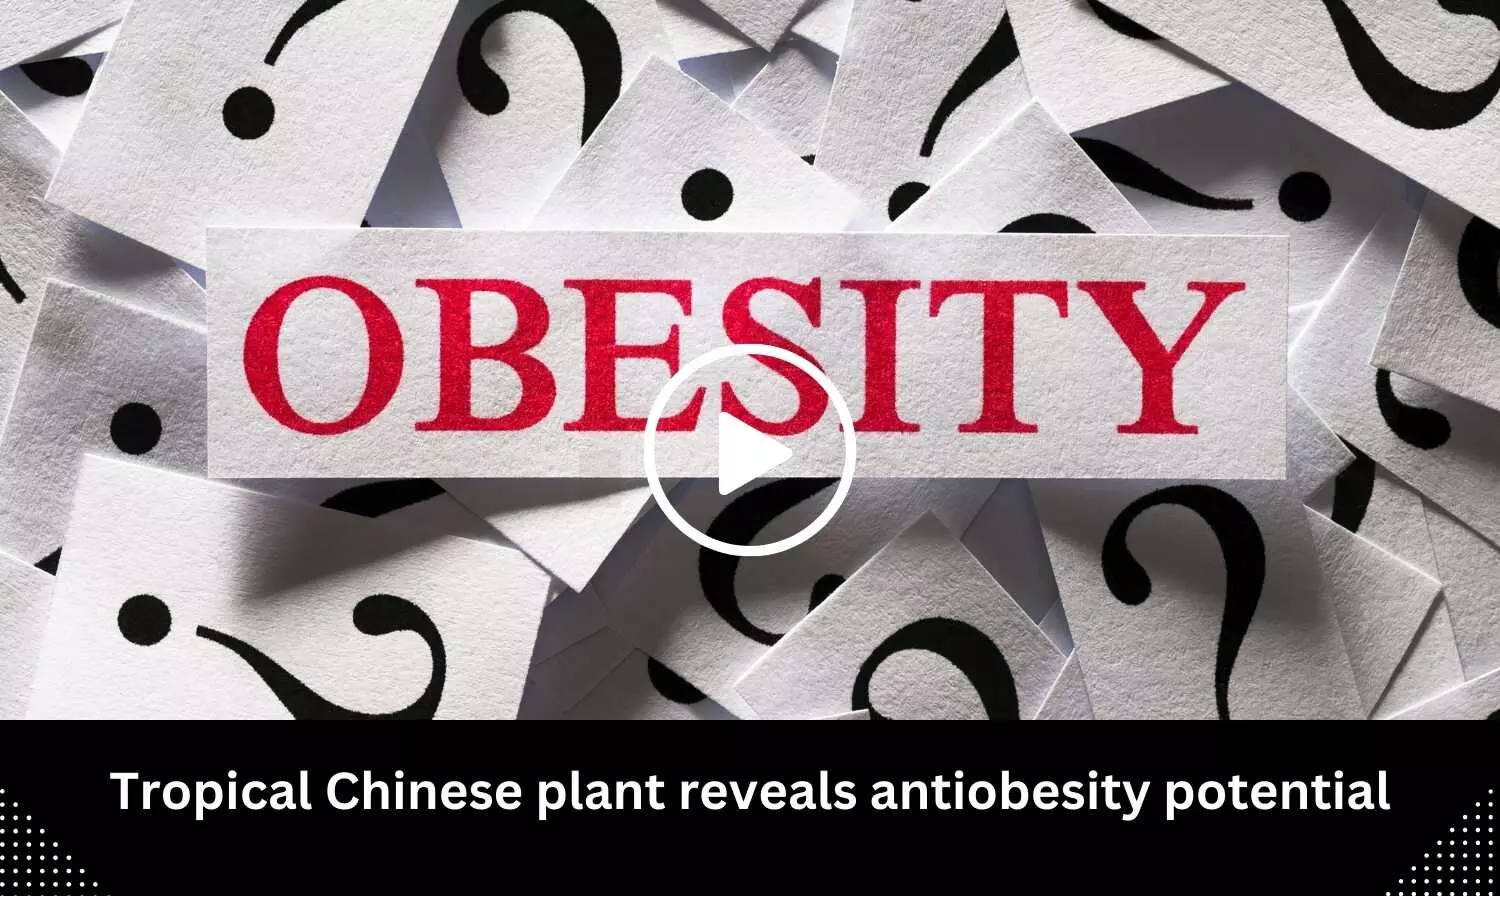 Tropical Chinese plant reveals antiobesity potential